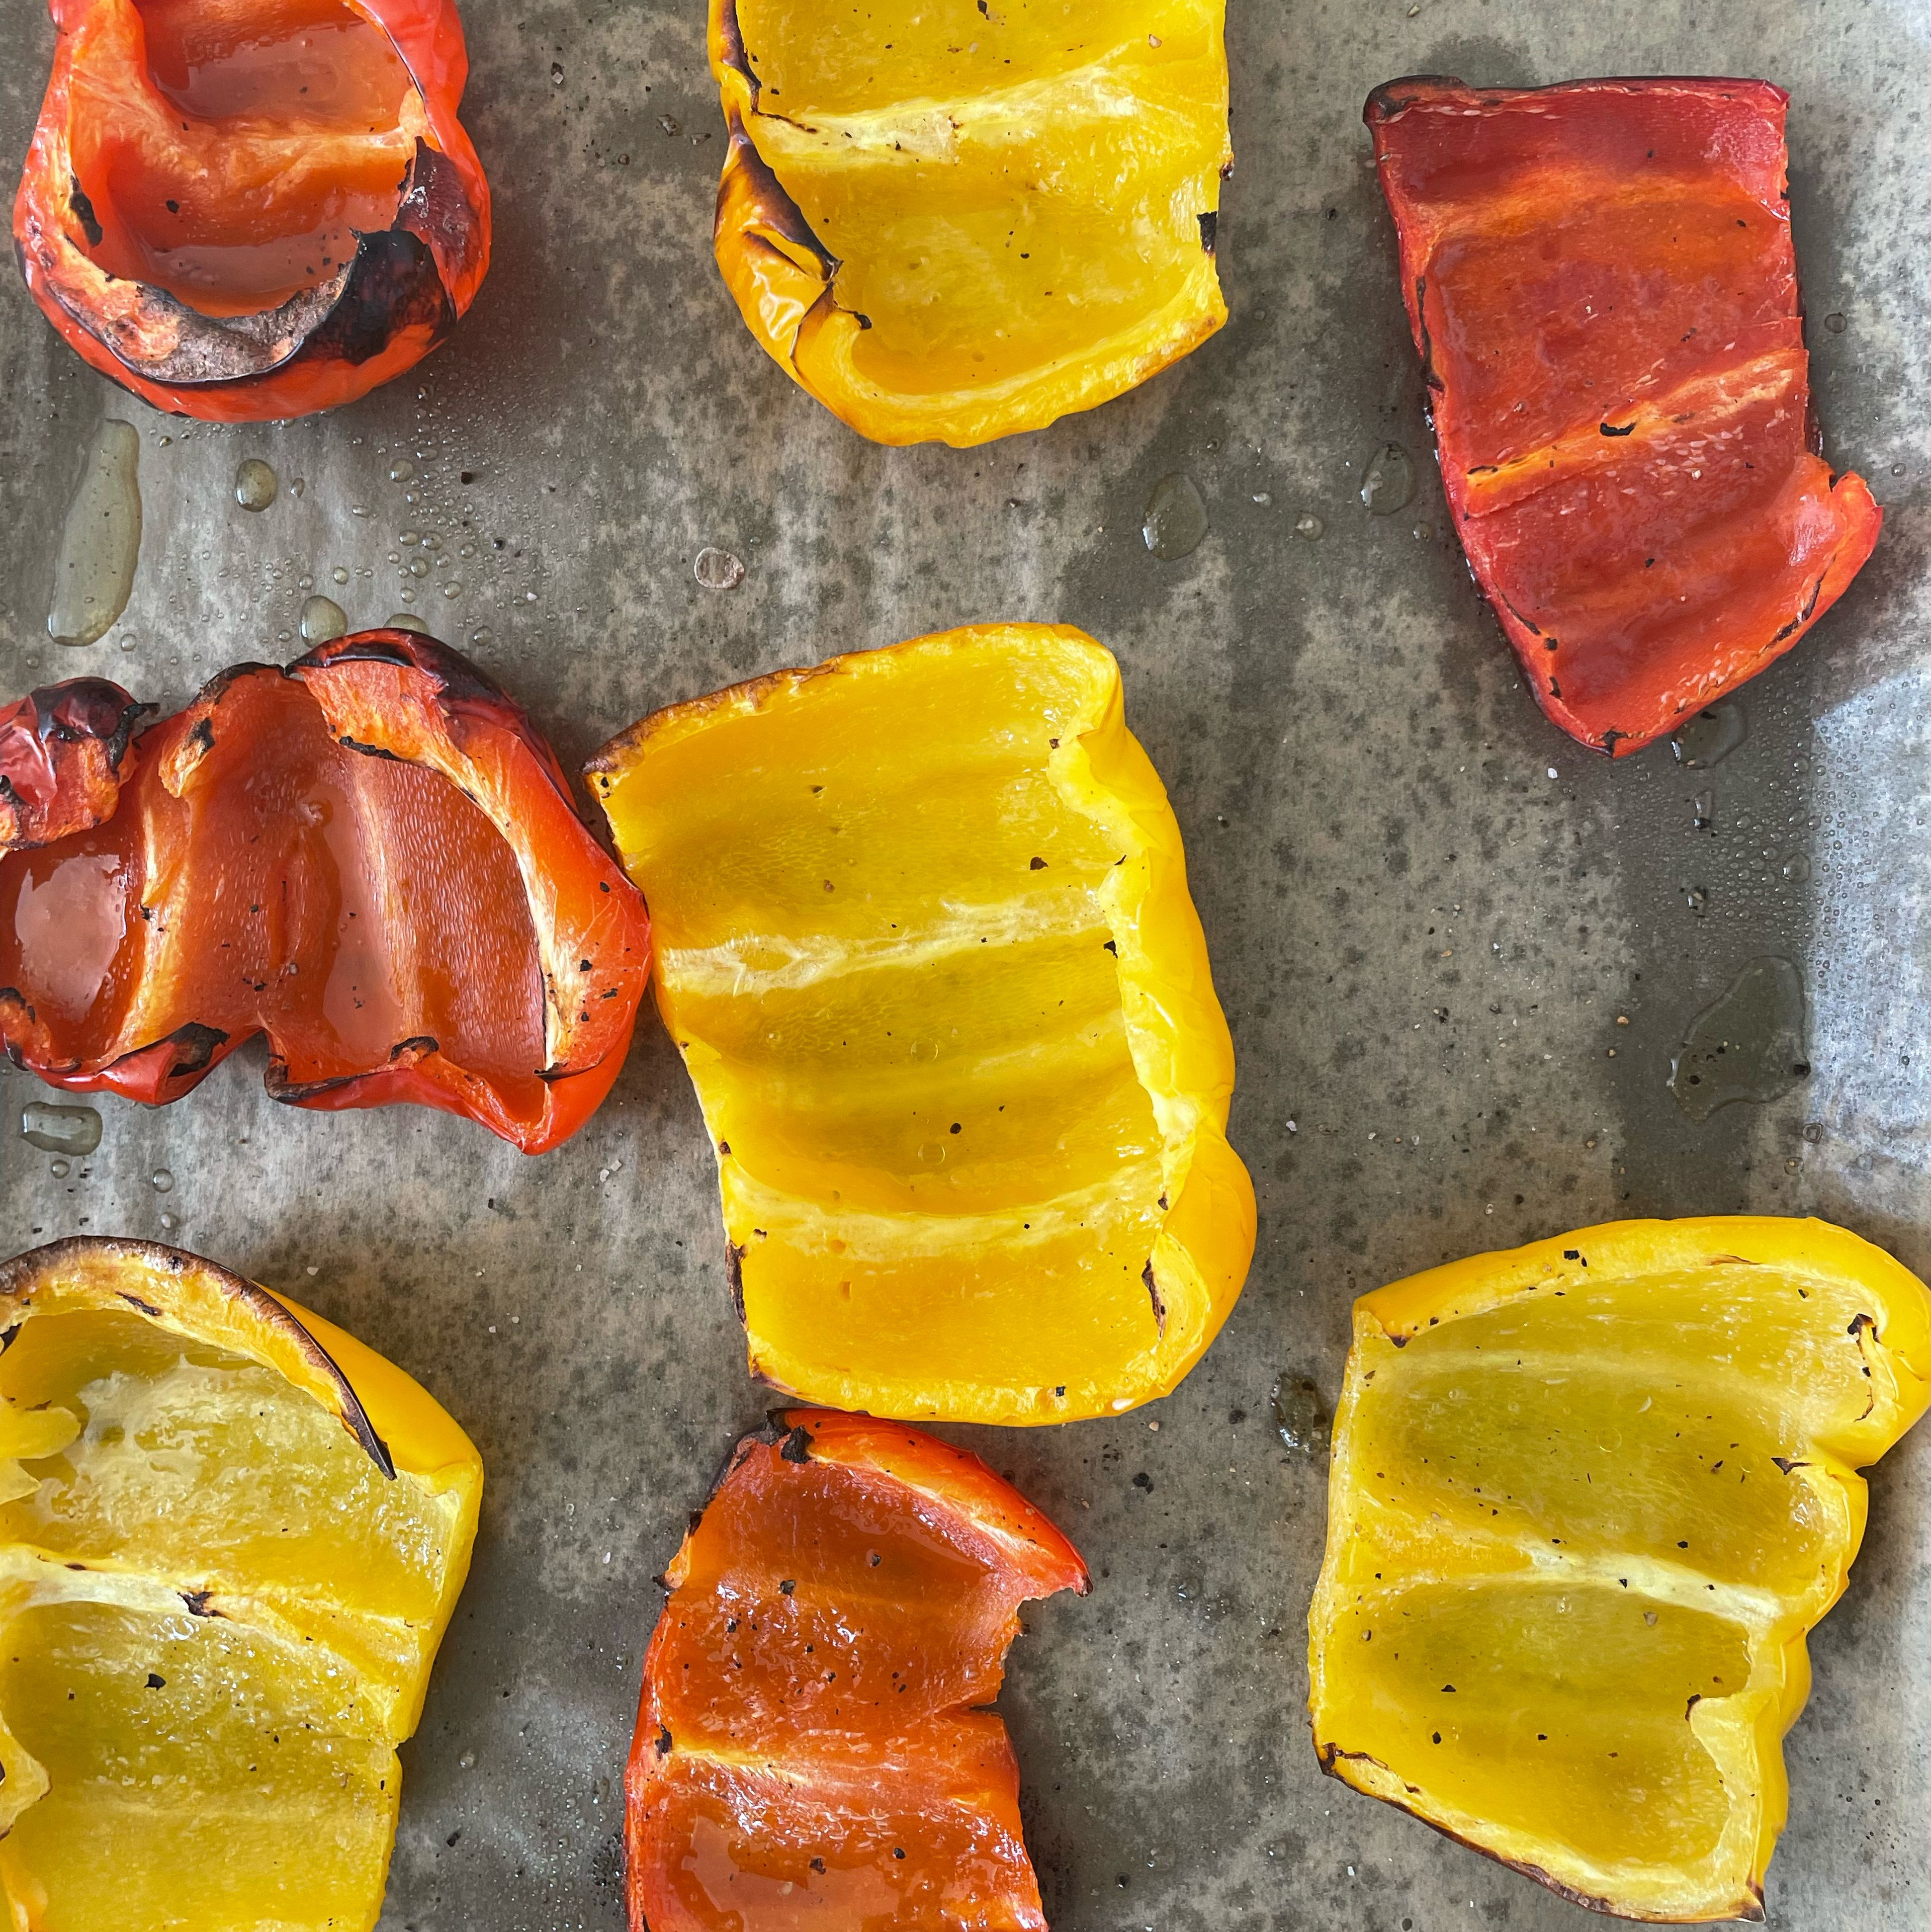 Cut the peppers into quarters and place them on a baking tray. Season with olive oil and a pinch of salt and pepper. Bake at 180 degrees for 25 minutes.